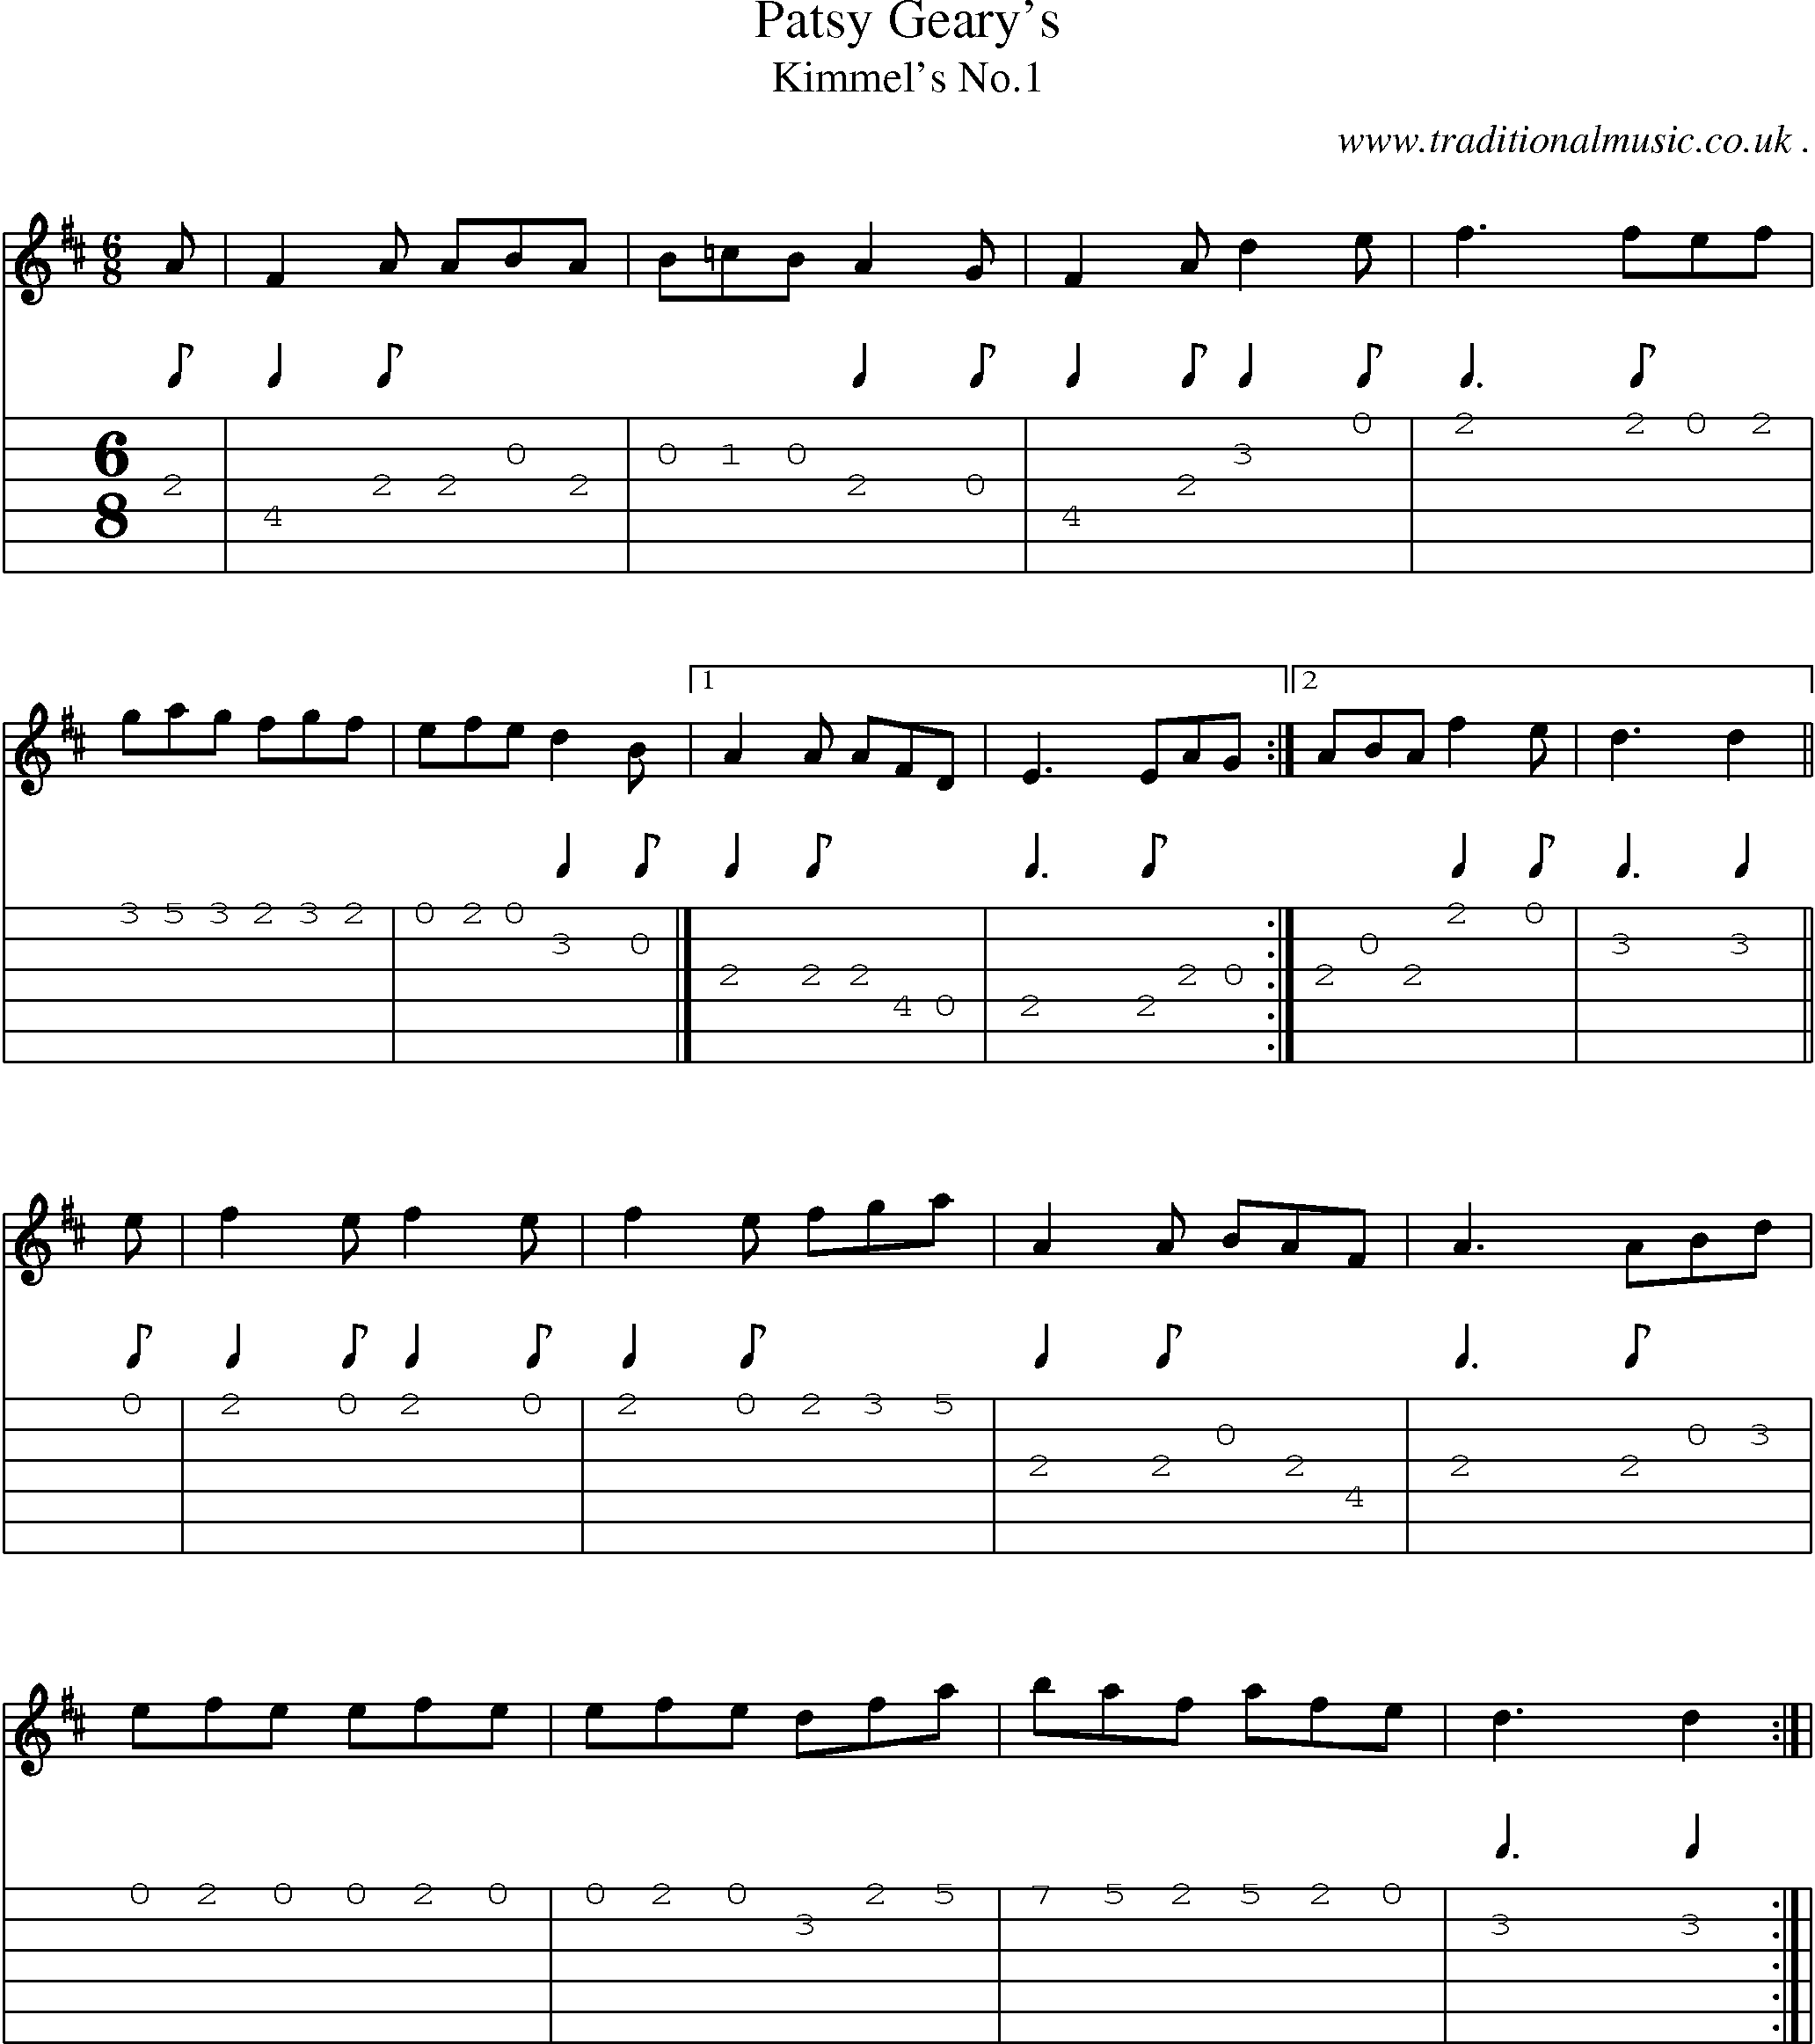 Sheet-Music and Guitar Tabs for Patsy Gearys